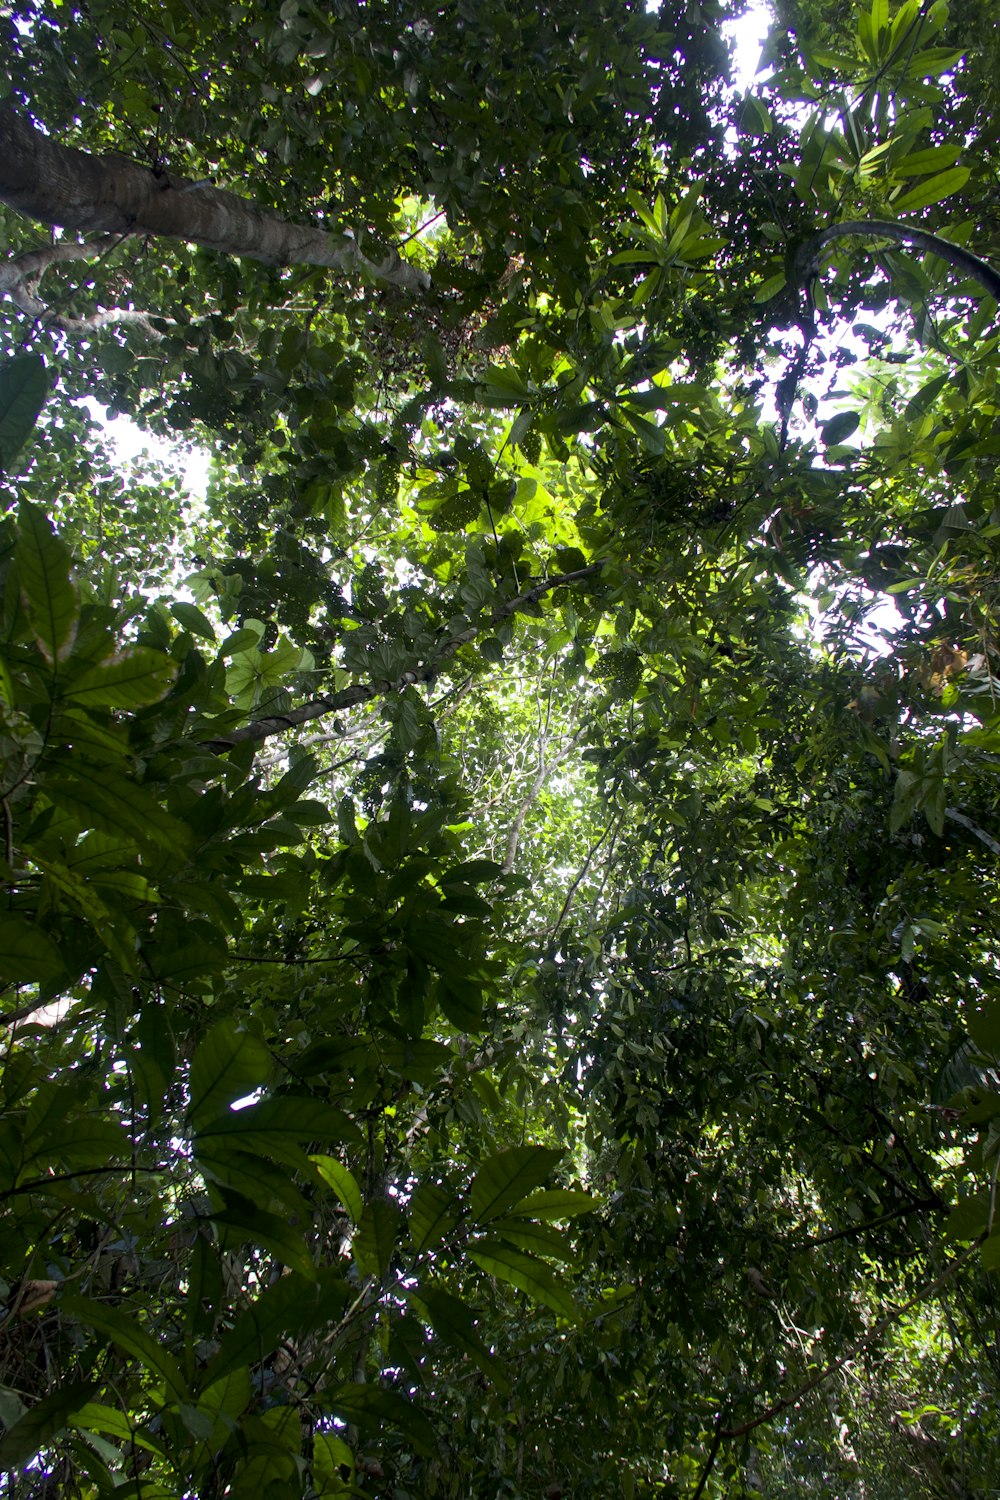 looking up into the canopy of a tropical forest